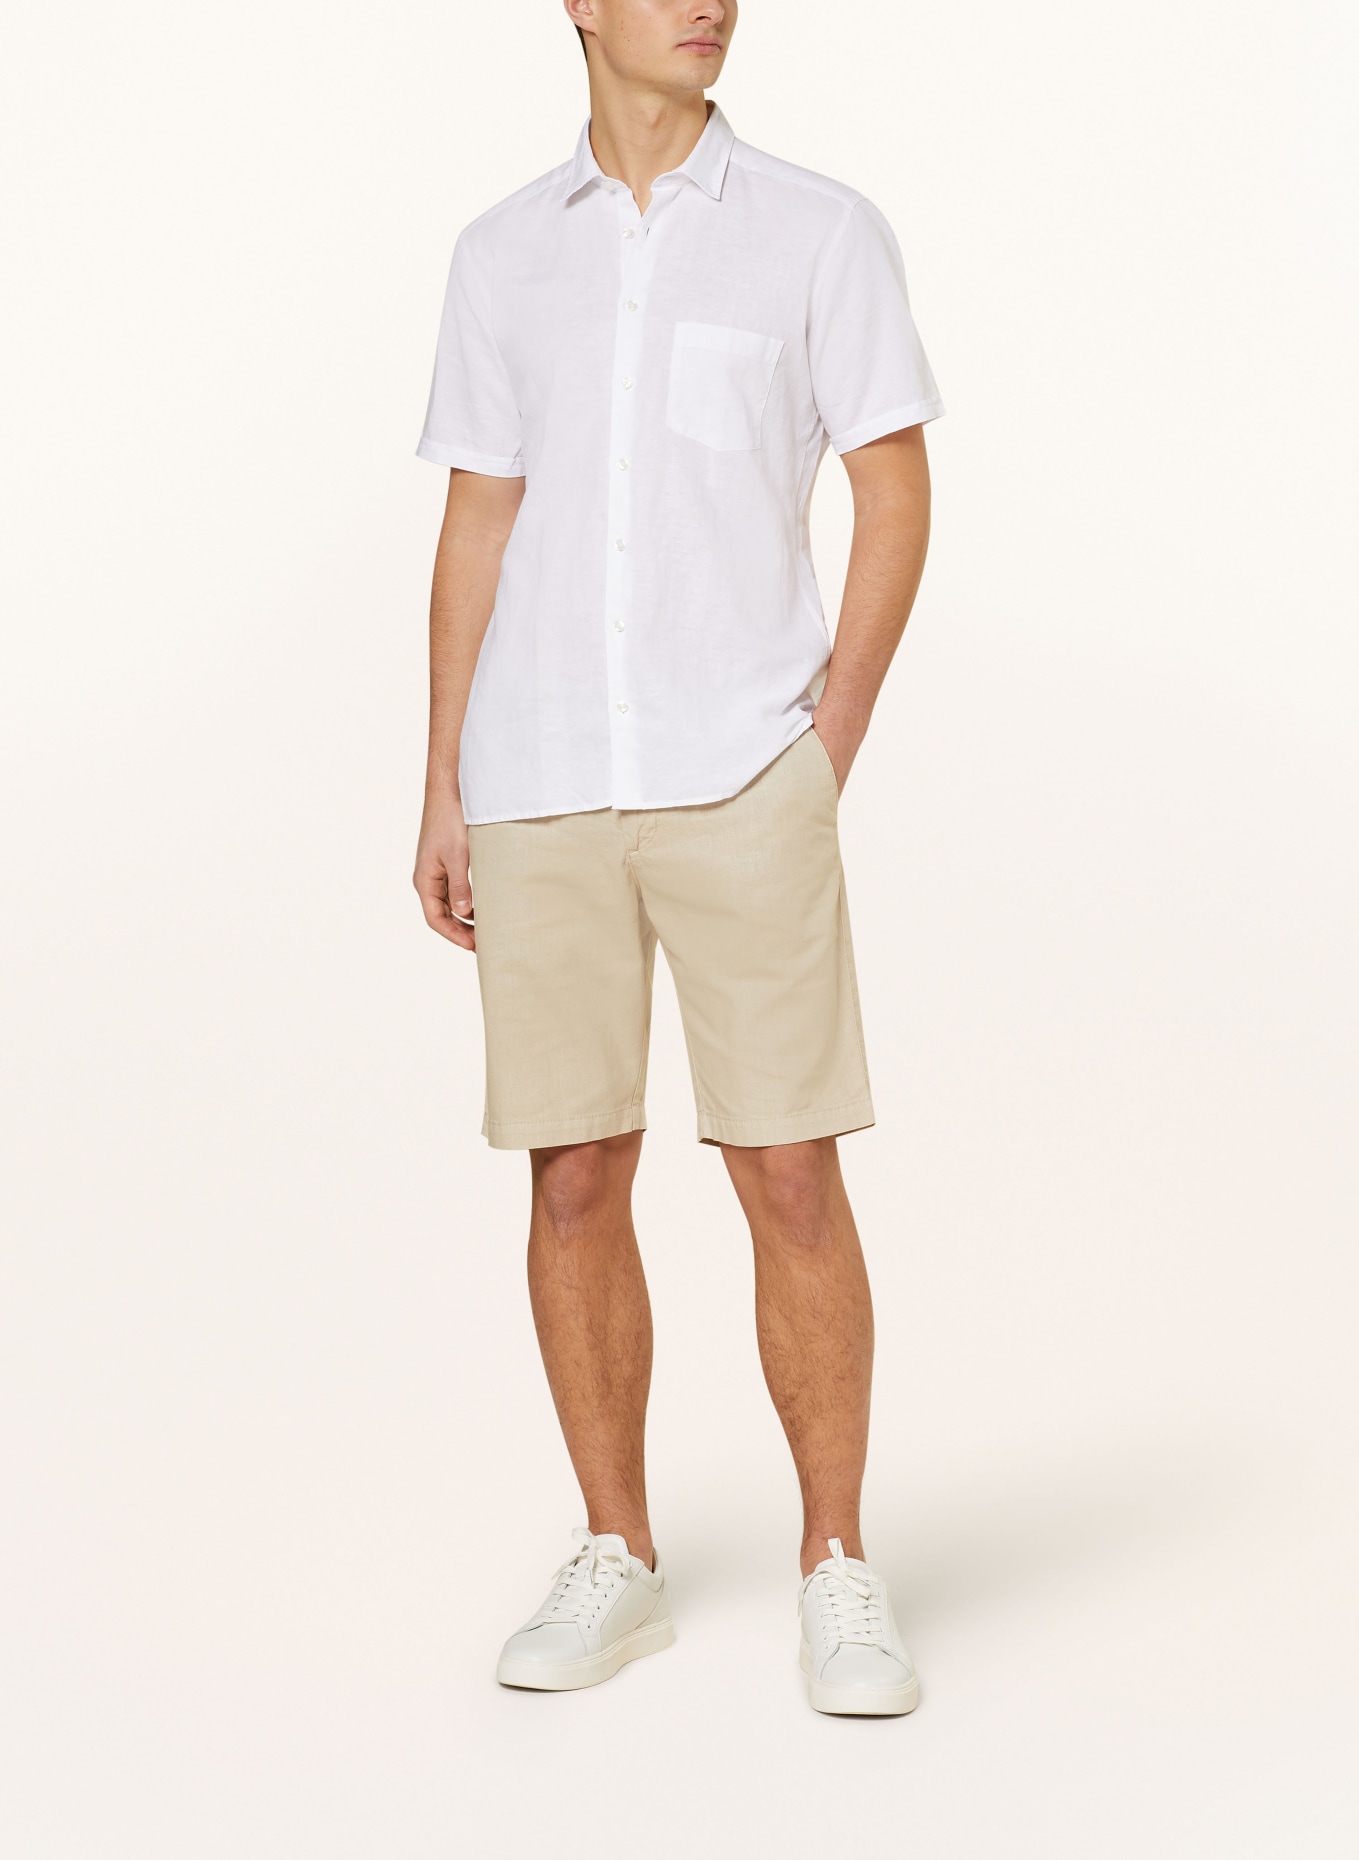 STROKESMAN'S Short sleeve shirt regular fit with linen, Color: WHITE (Image 2)